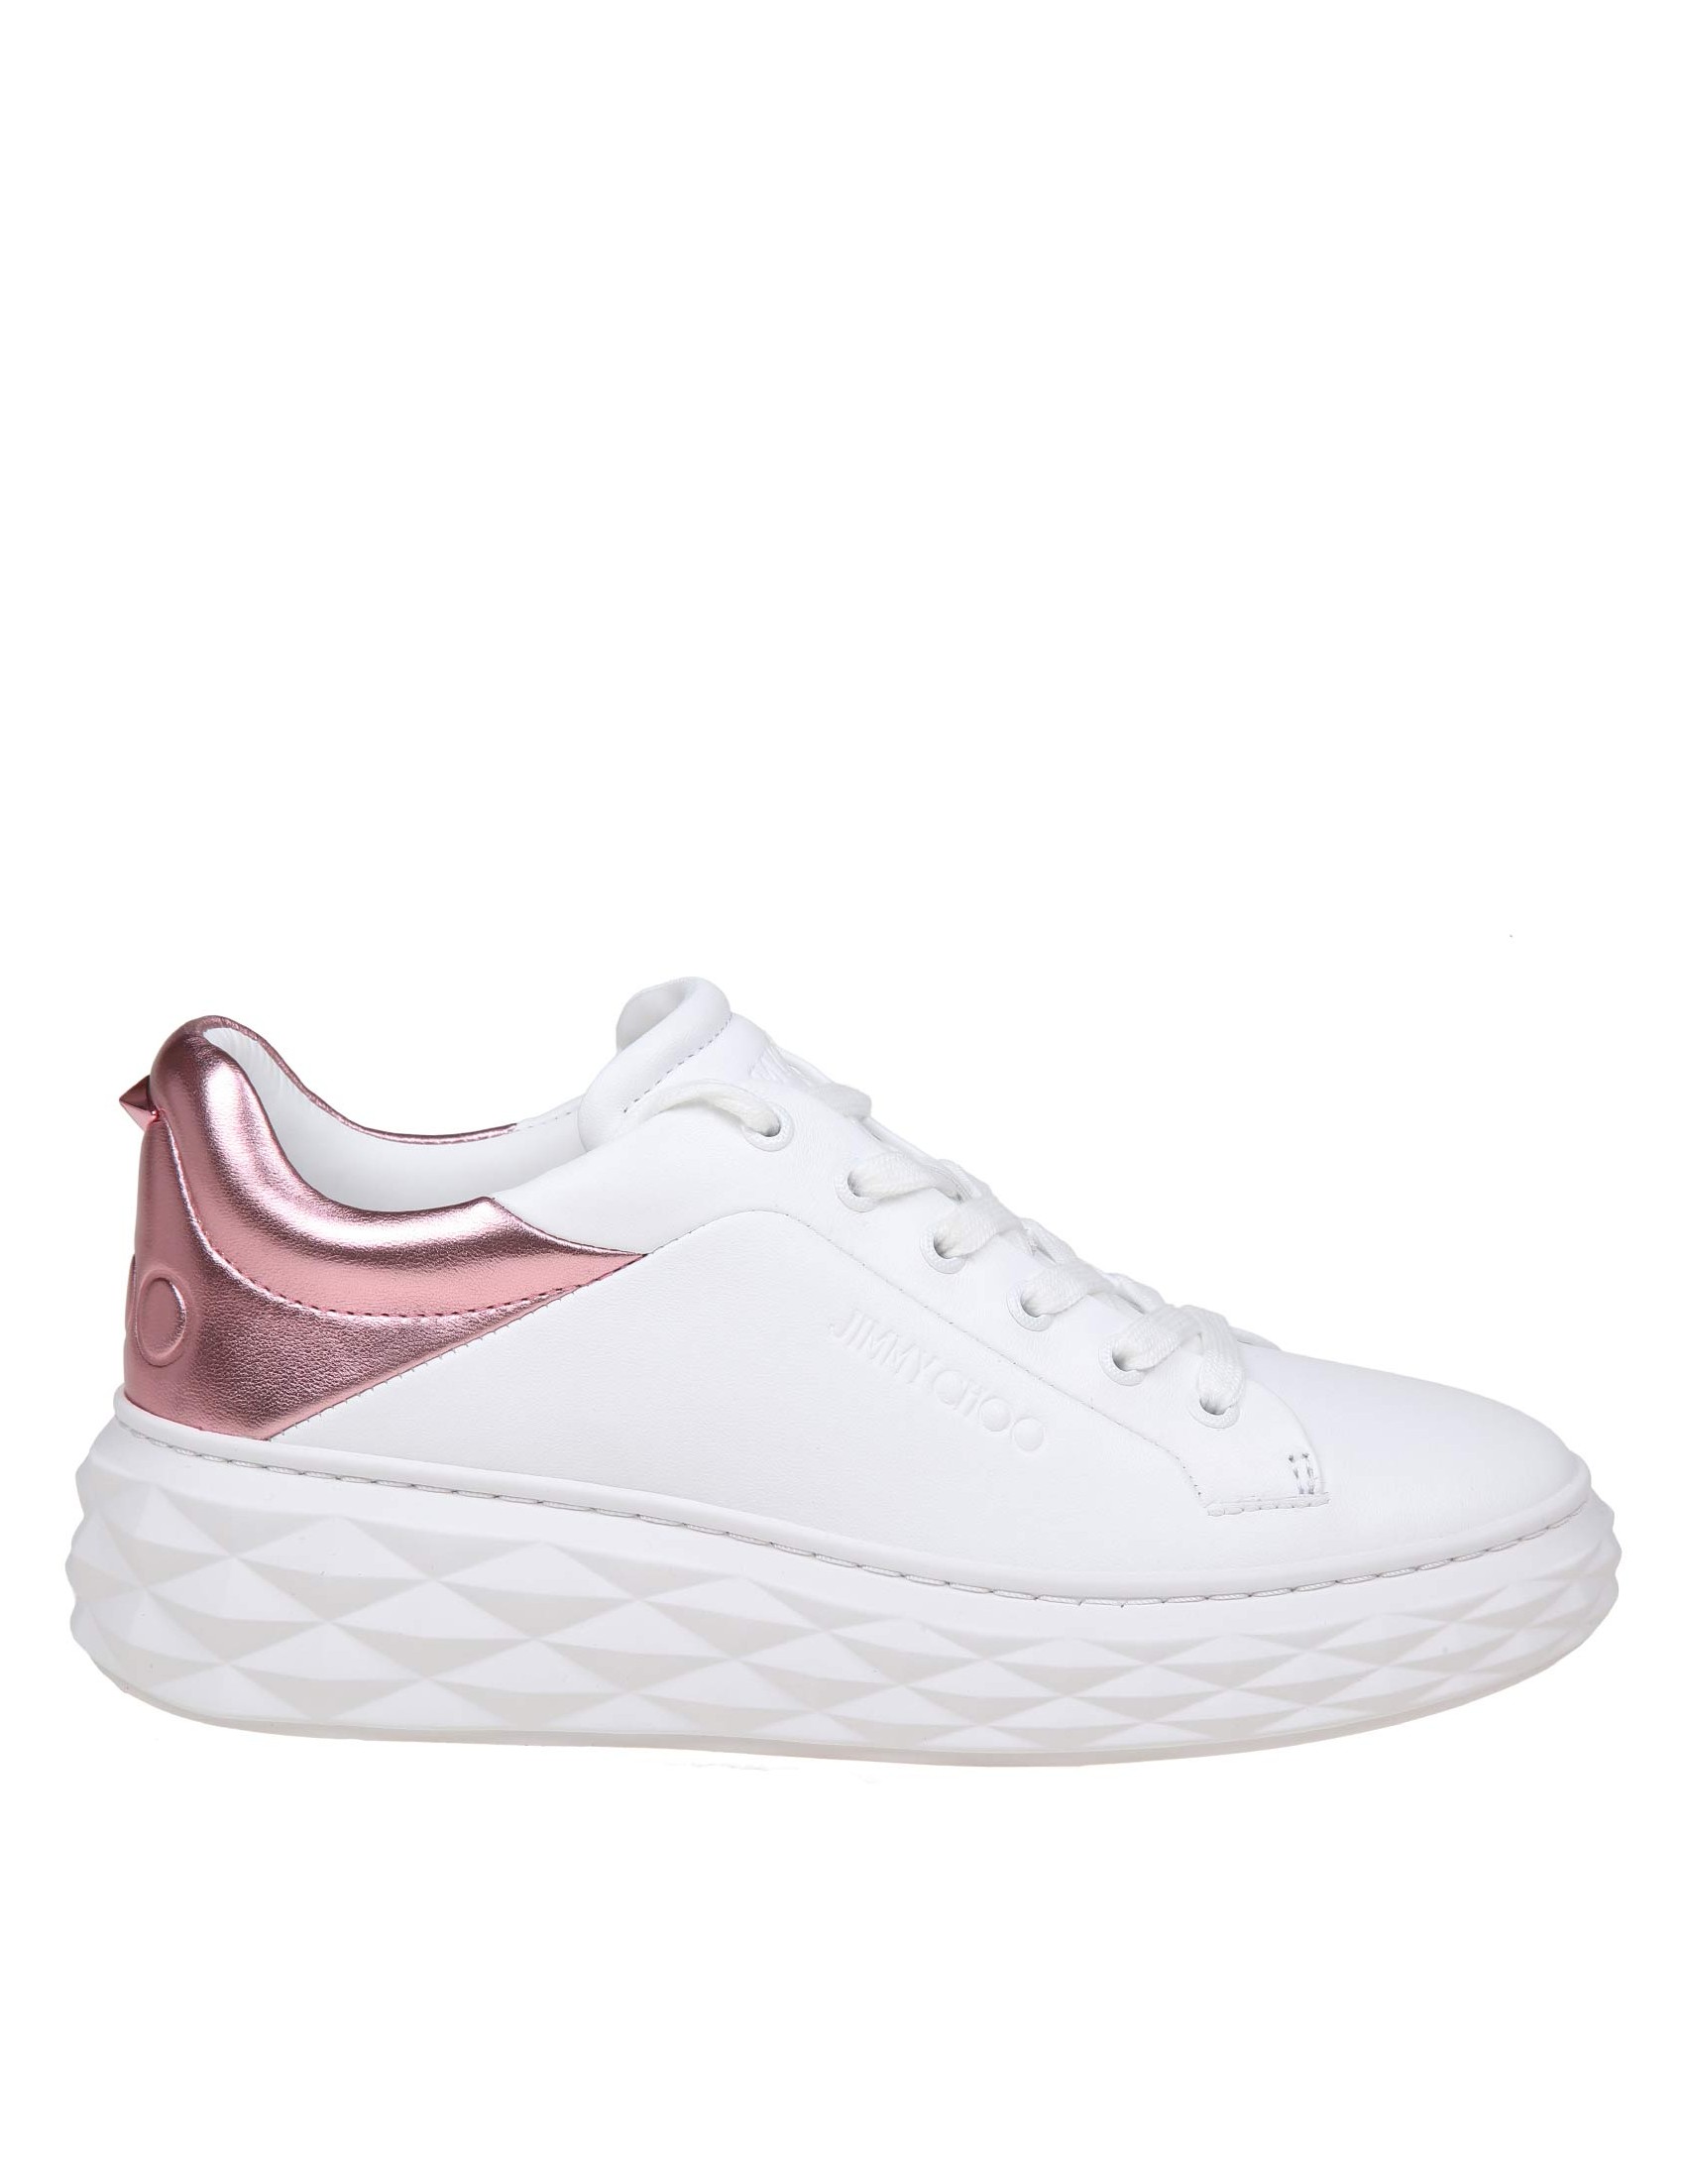 JIMMY CHOO DIAMOND MAXI SNEAKERS IN WHITE AND PINK LEATHER